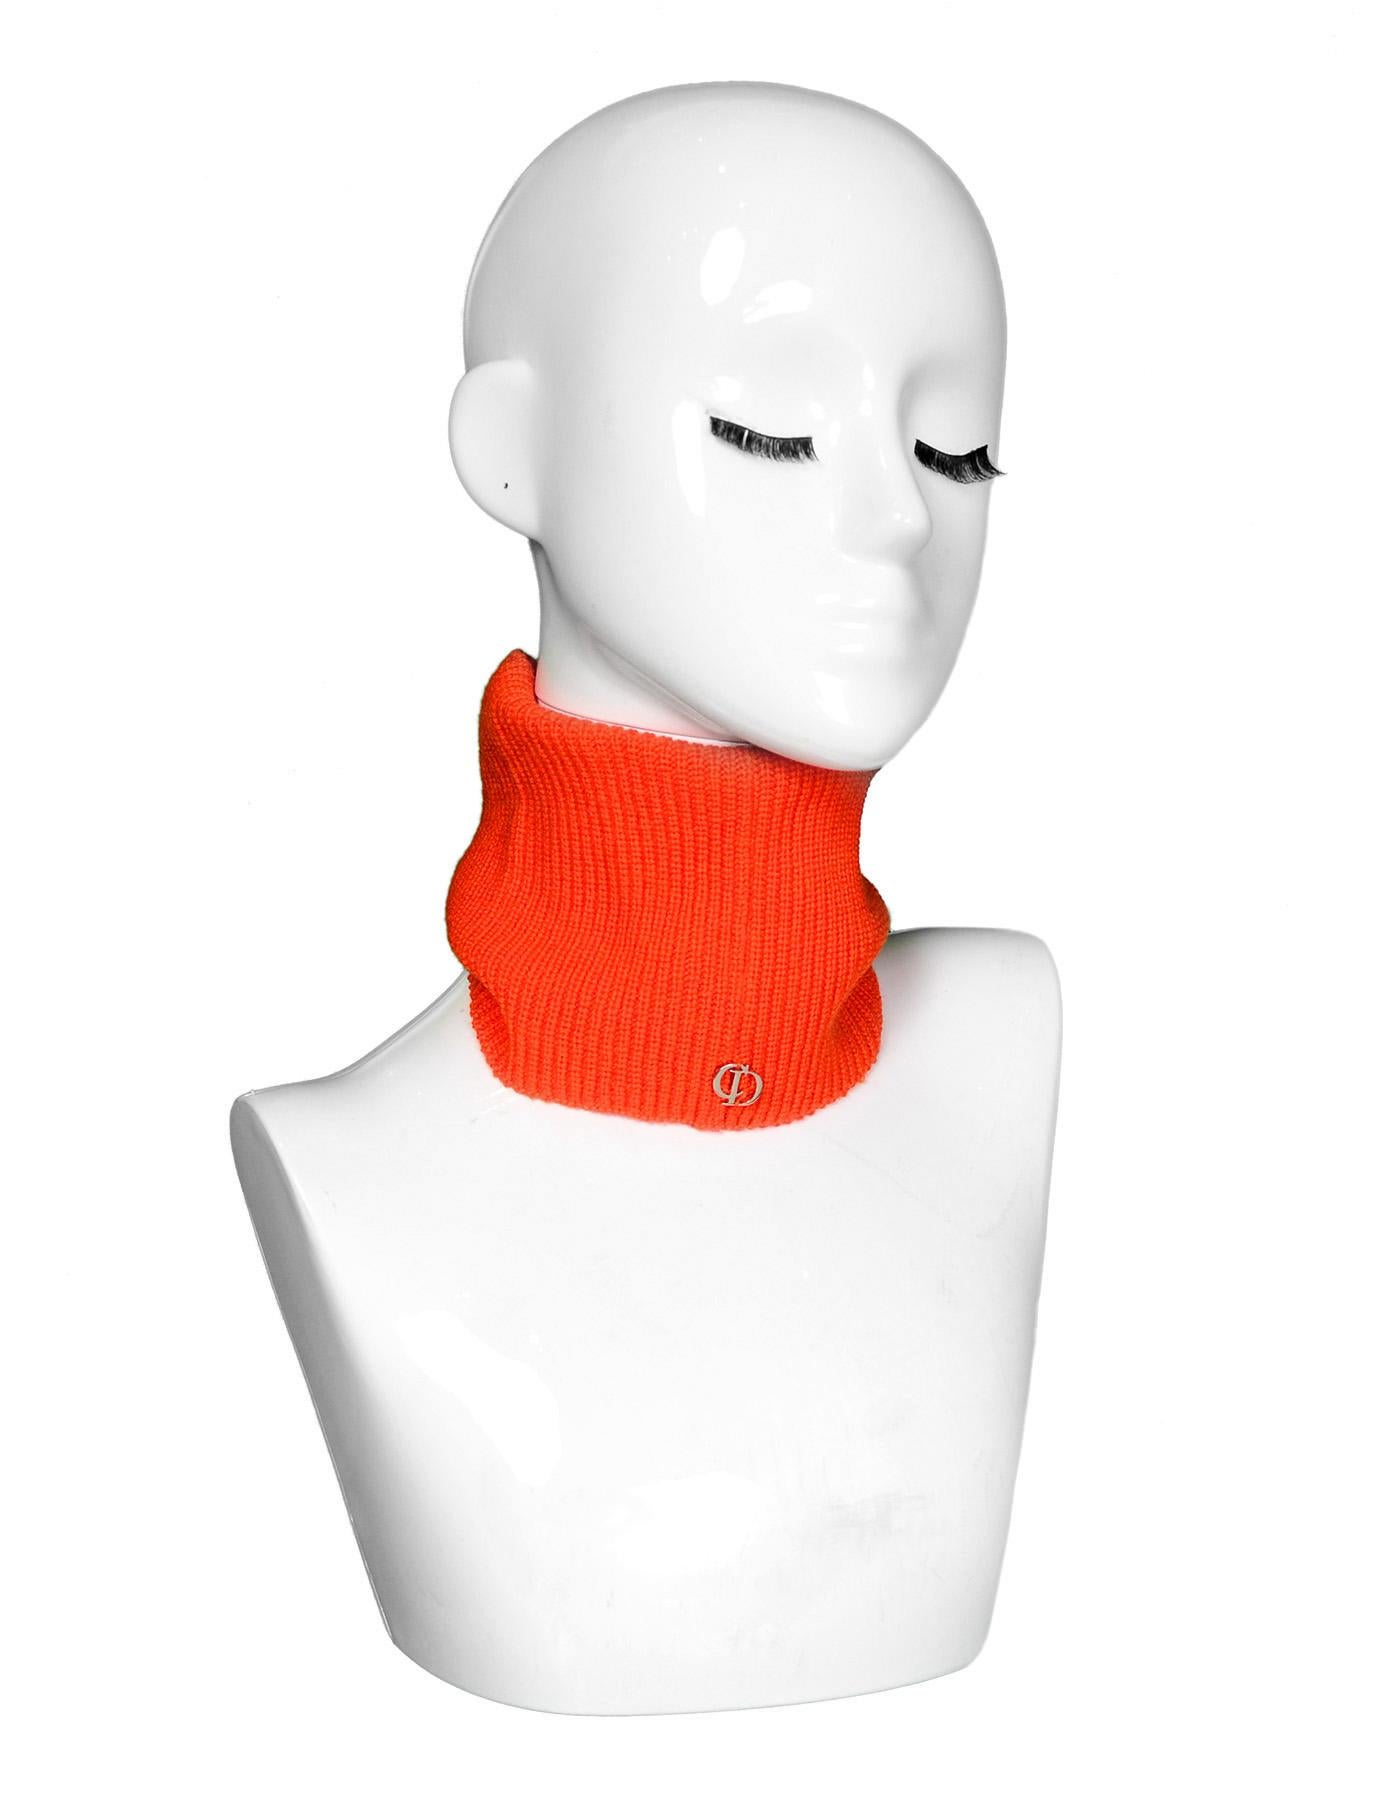 Christian Dior 2018 Bright Neon Orange Wool Neck Warmer NWT Unisex

Made In: Italy 
Year of Production: 2018
Color: Bright orange 
Hardware: Goldtone
Materials: 100% wool
Closure/Opening: Pull on 
Overall Condition: New with tags
Estimated Retail: